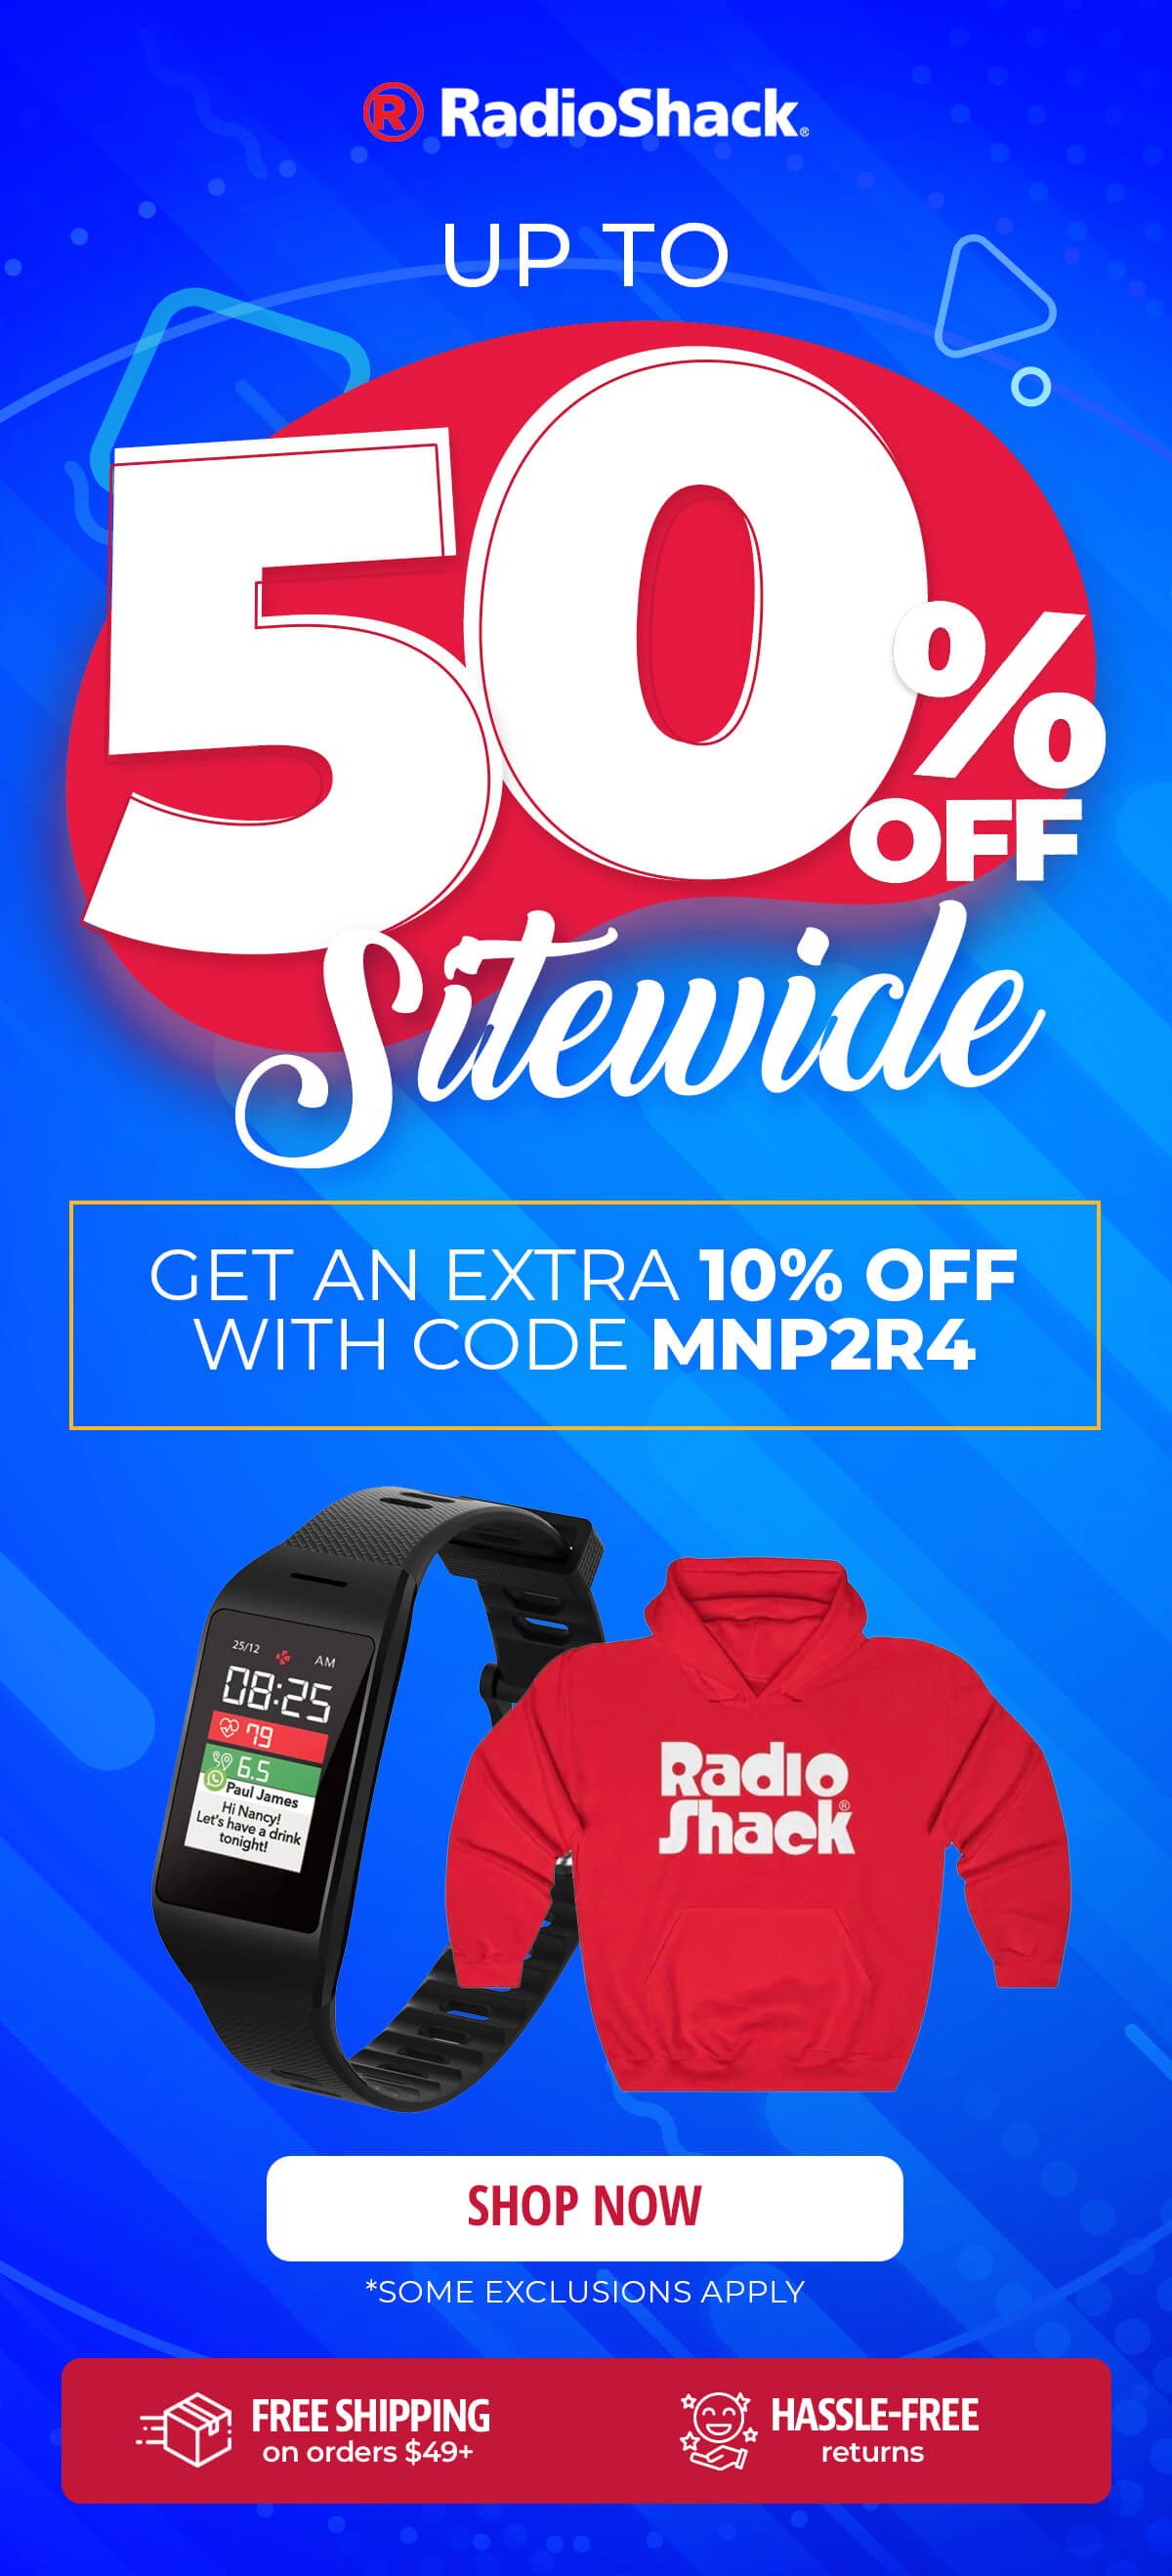 Sitewide Sale